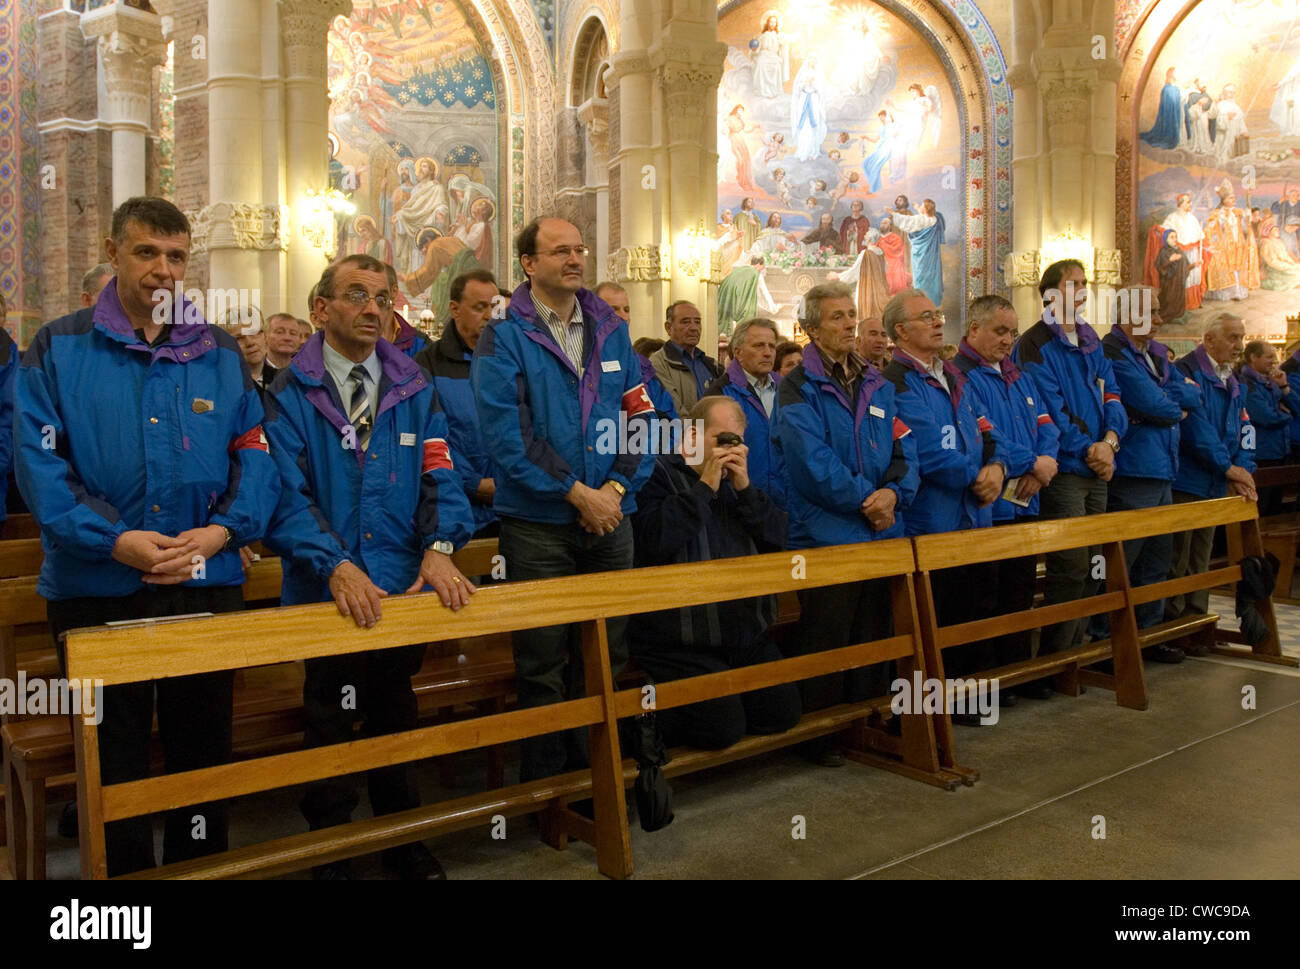 Mass in the Rosary Basilica in Lourdes, France Stock Photo